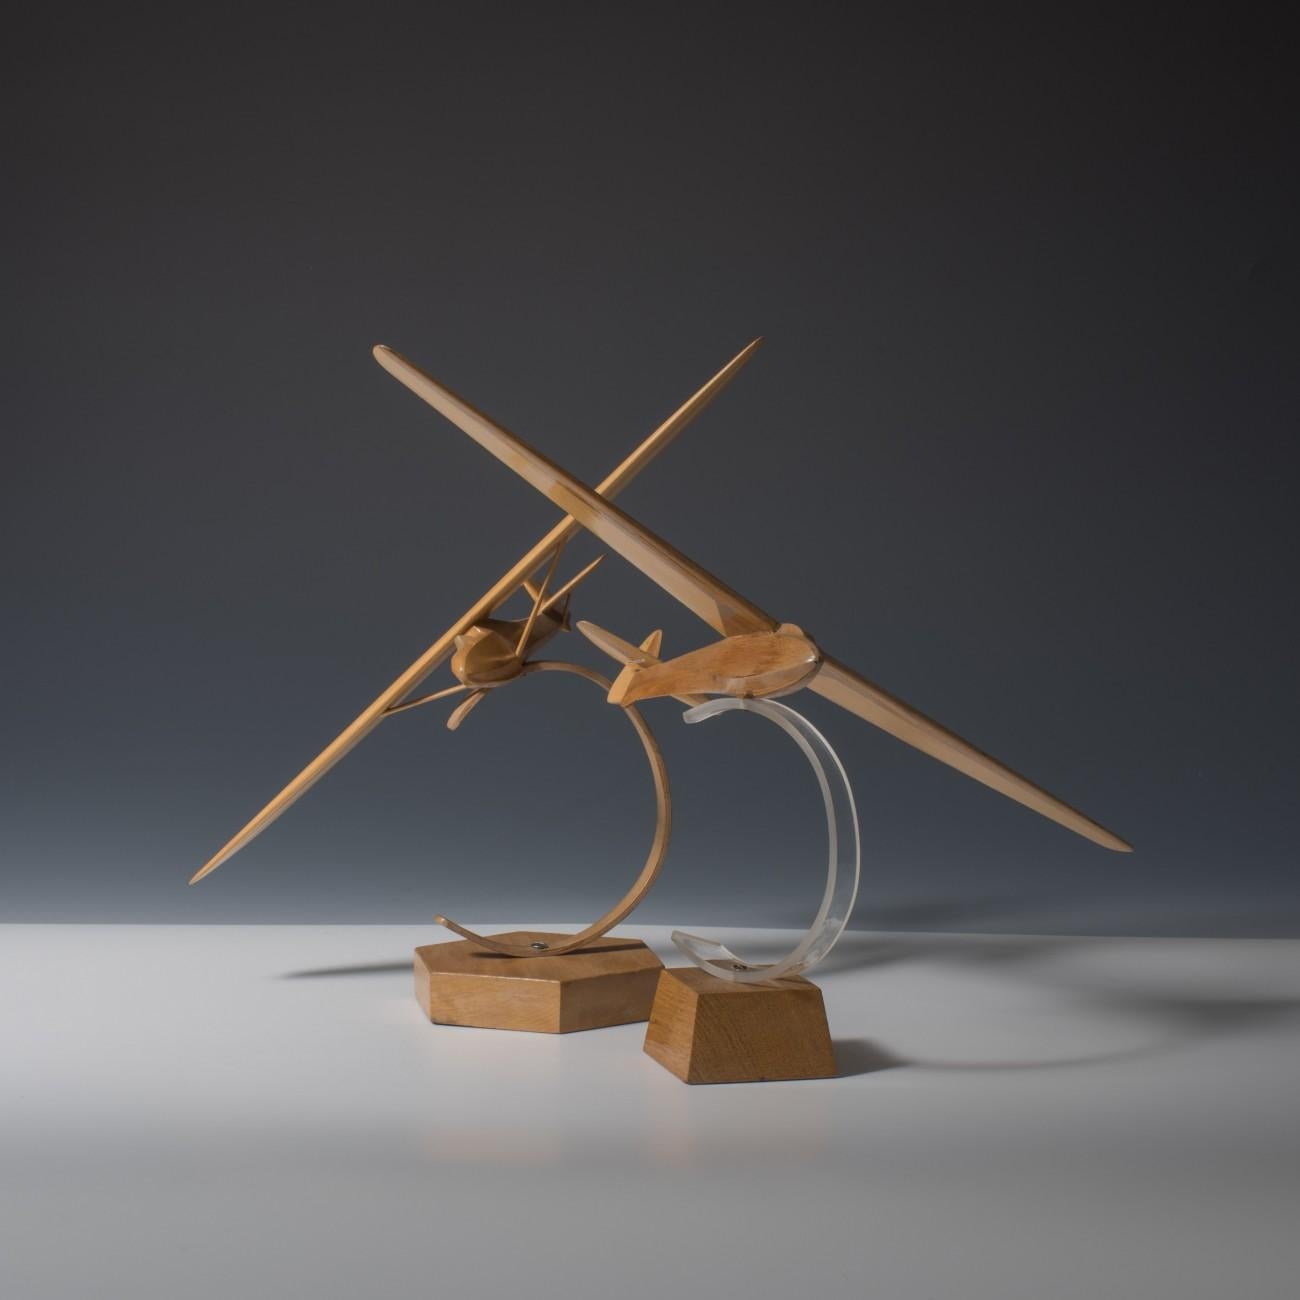 Two finely carved, laminated wooden models of gliders from one of the German airfields such as Oerlinghausen or Scharfoldendorf. The larger model is mounted on a Perspex stand that sits on a wooden base and the smaller one is mounted on an all wood